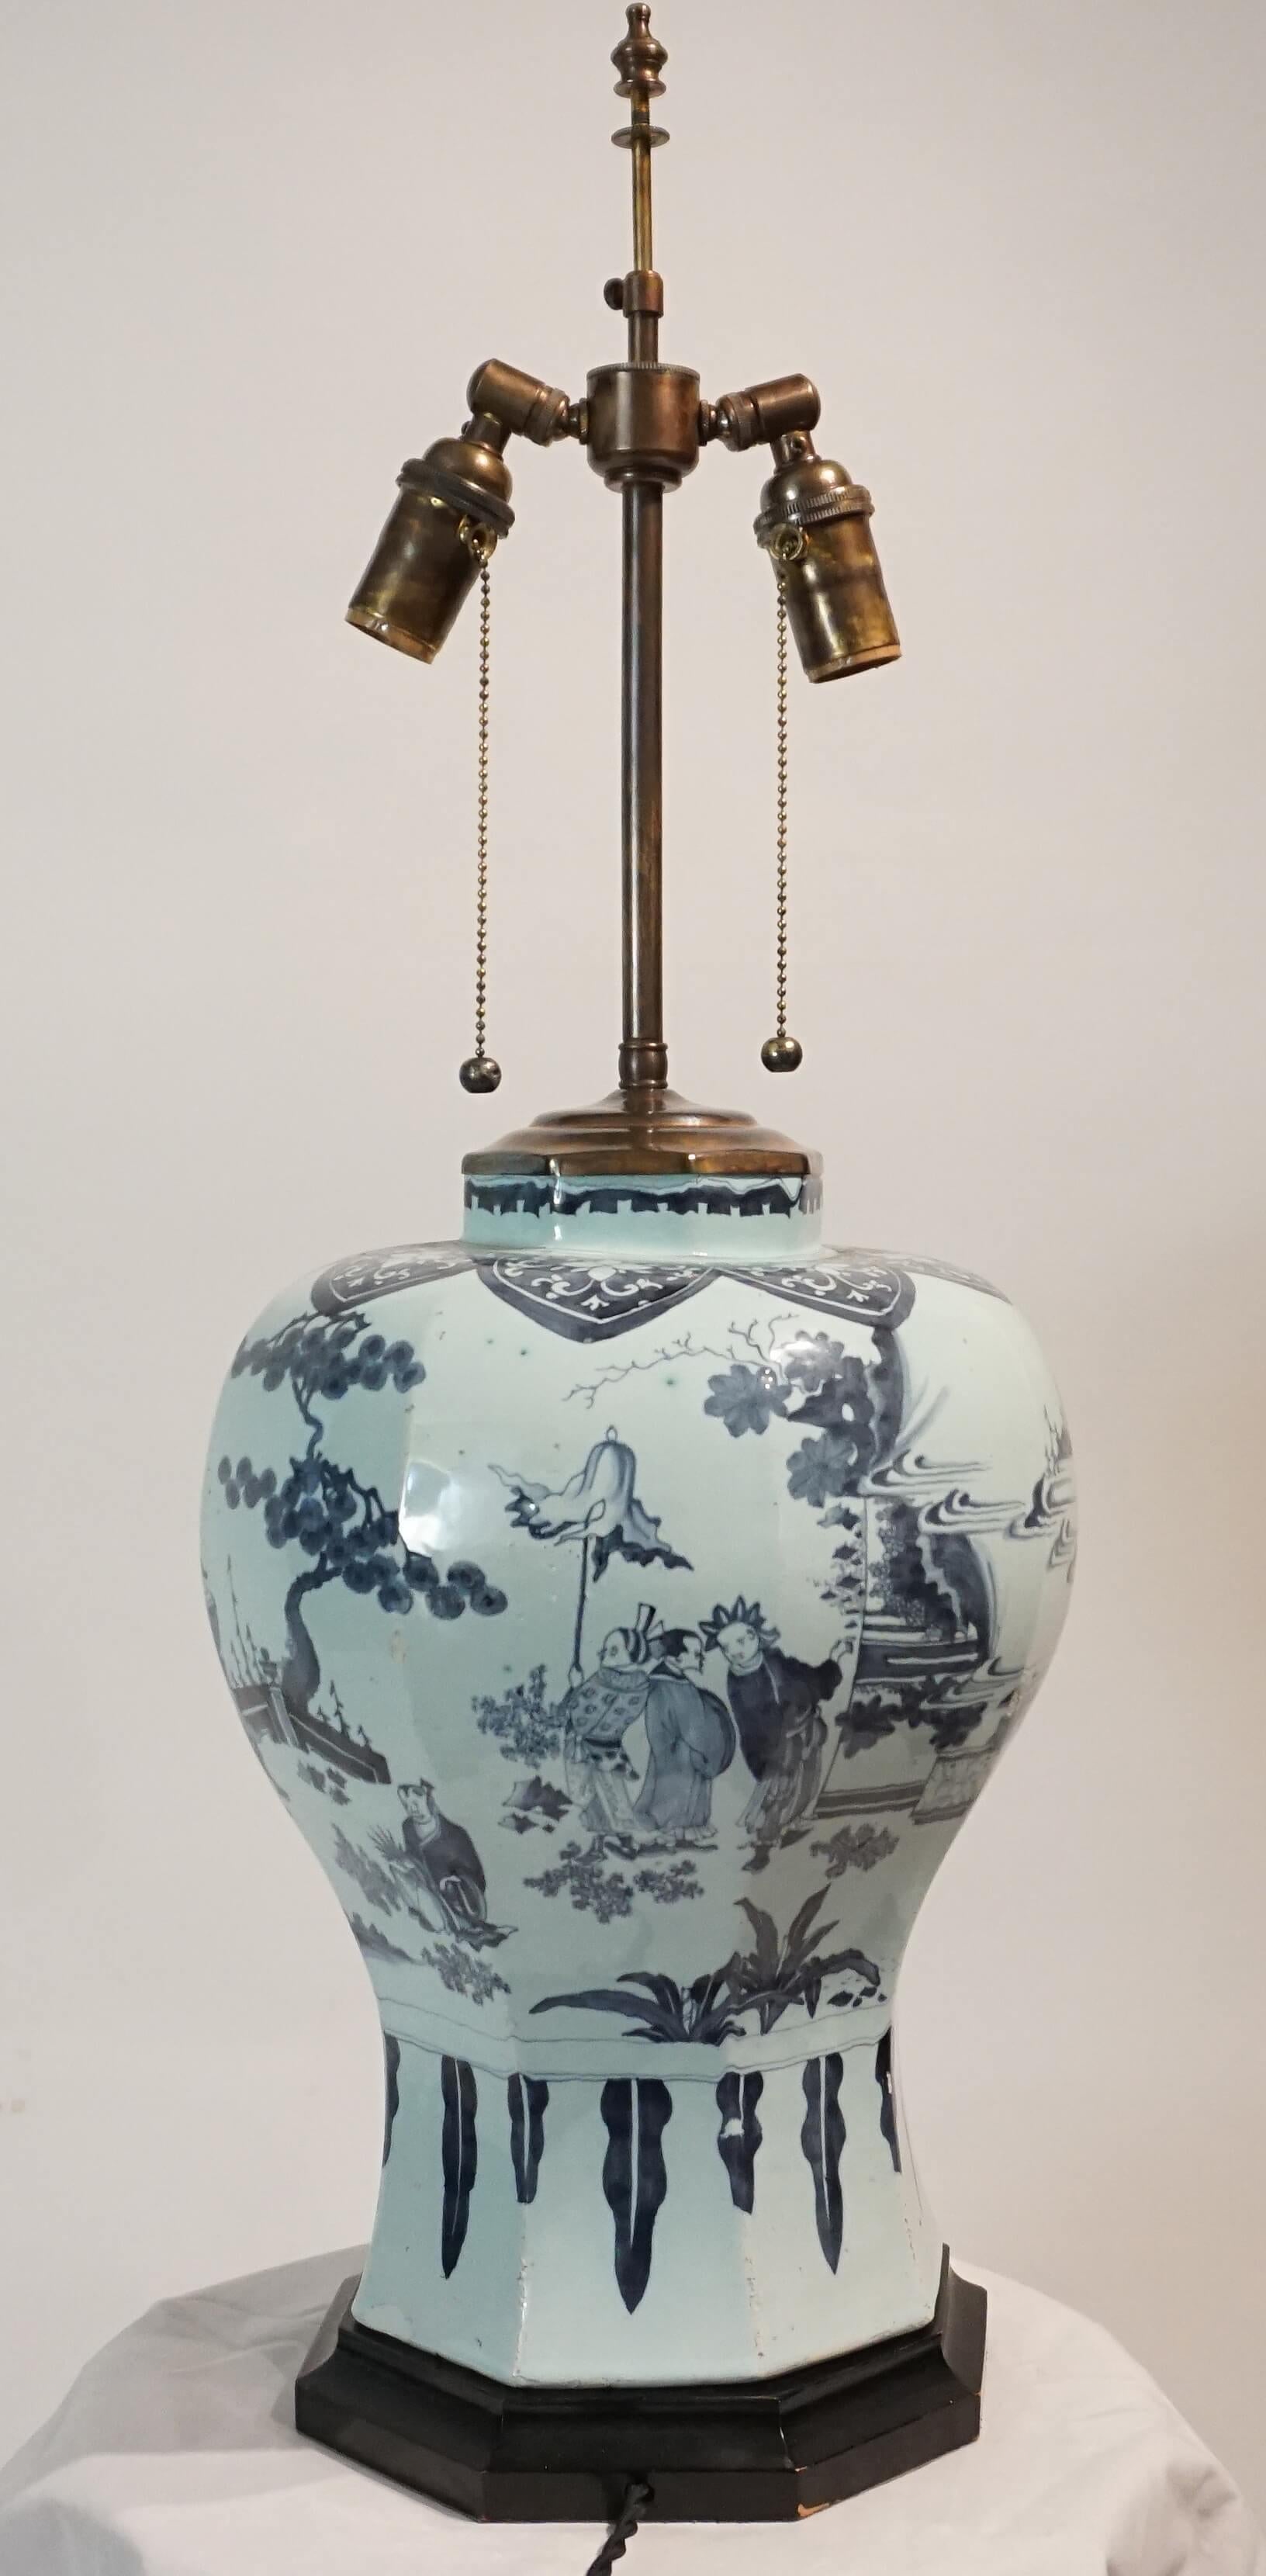 Wood Blue and White Dutch Delft Chinoiserie Baluster Vase Table Lamp, circa 1670